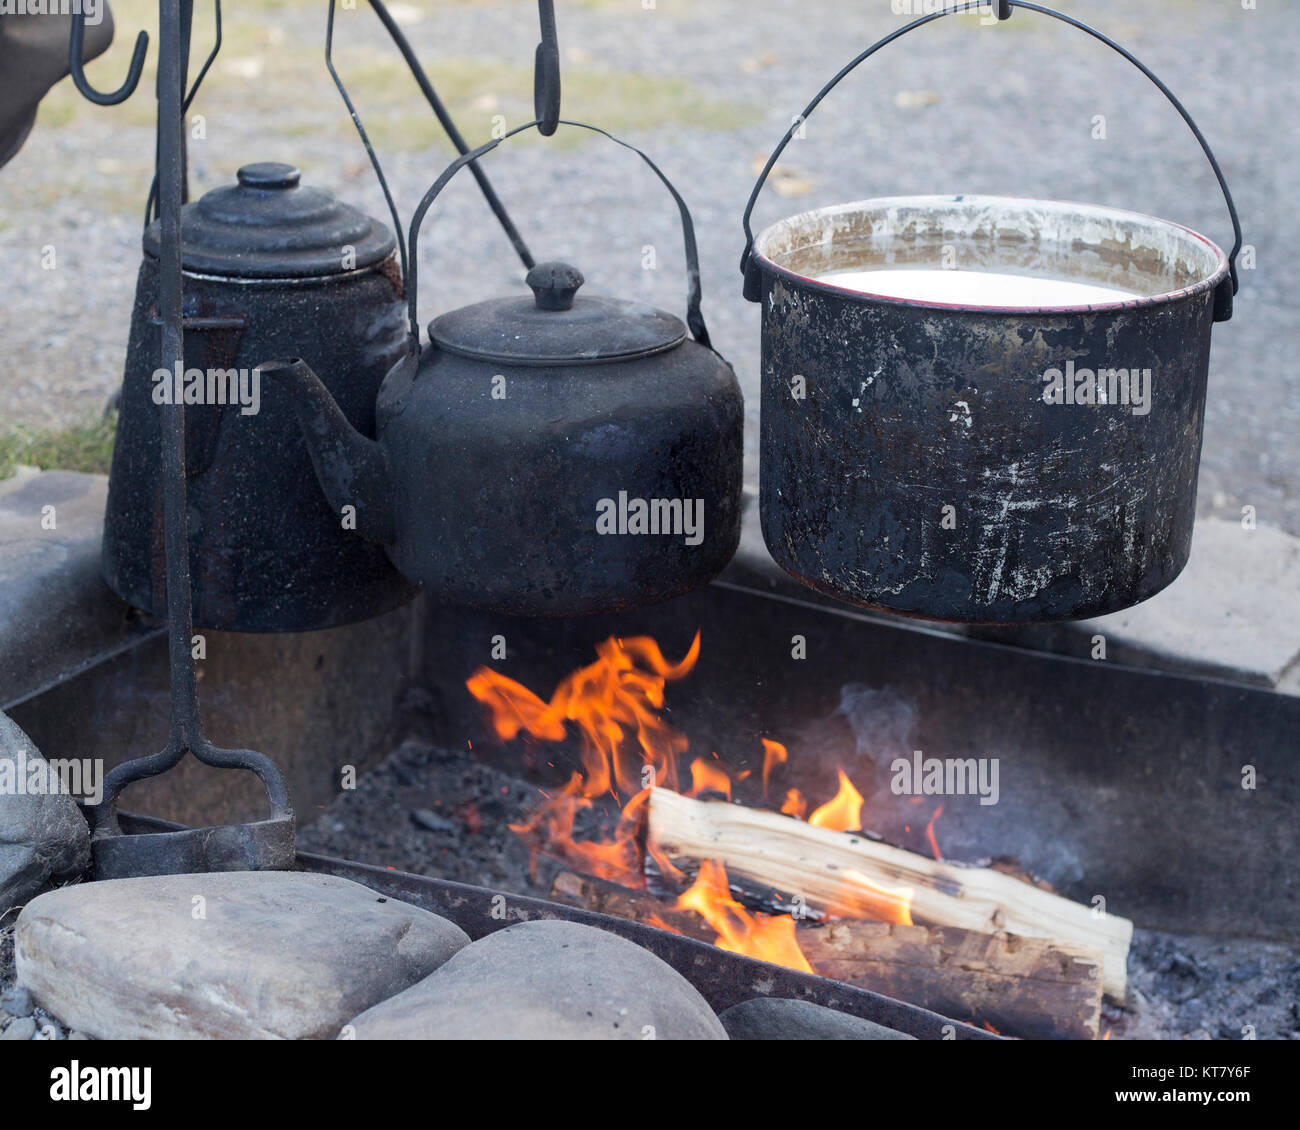 Water heating in pot over campfire at roundup camp to make cowboy coffee recreating late 1800s experience for visitors on Bar U Ranch, Alberta, Canada Stock Photo